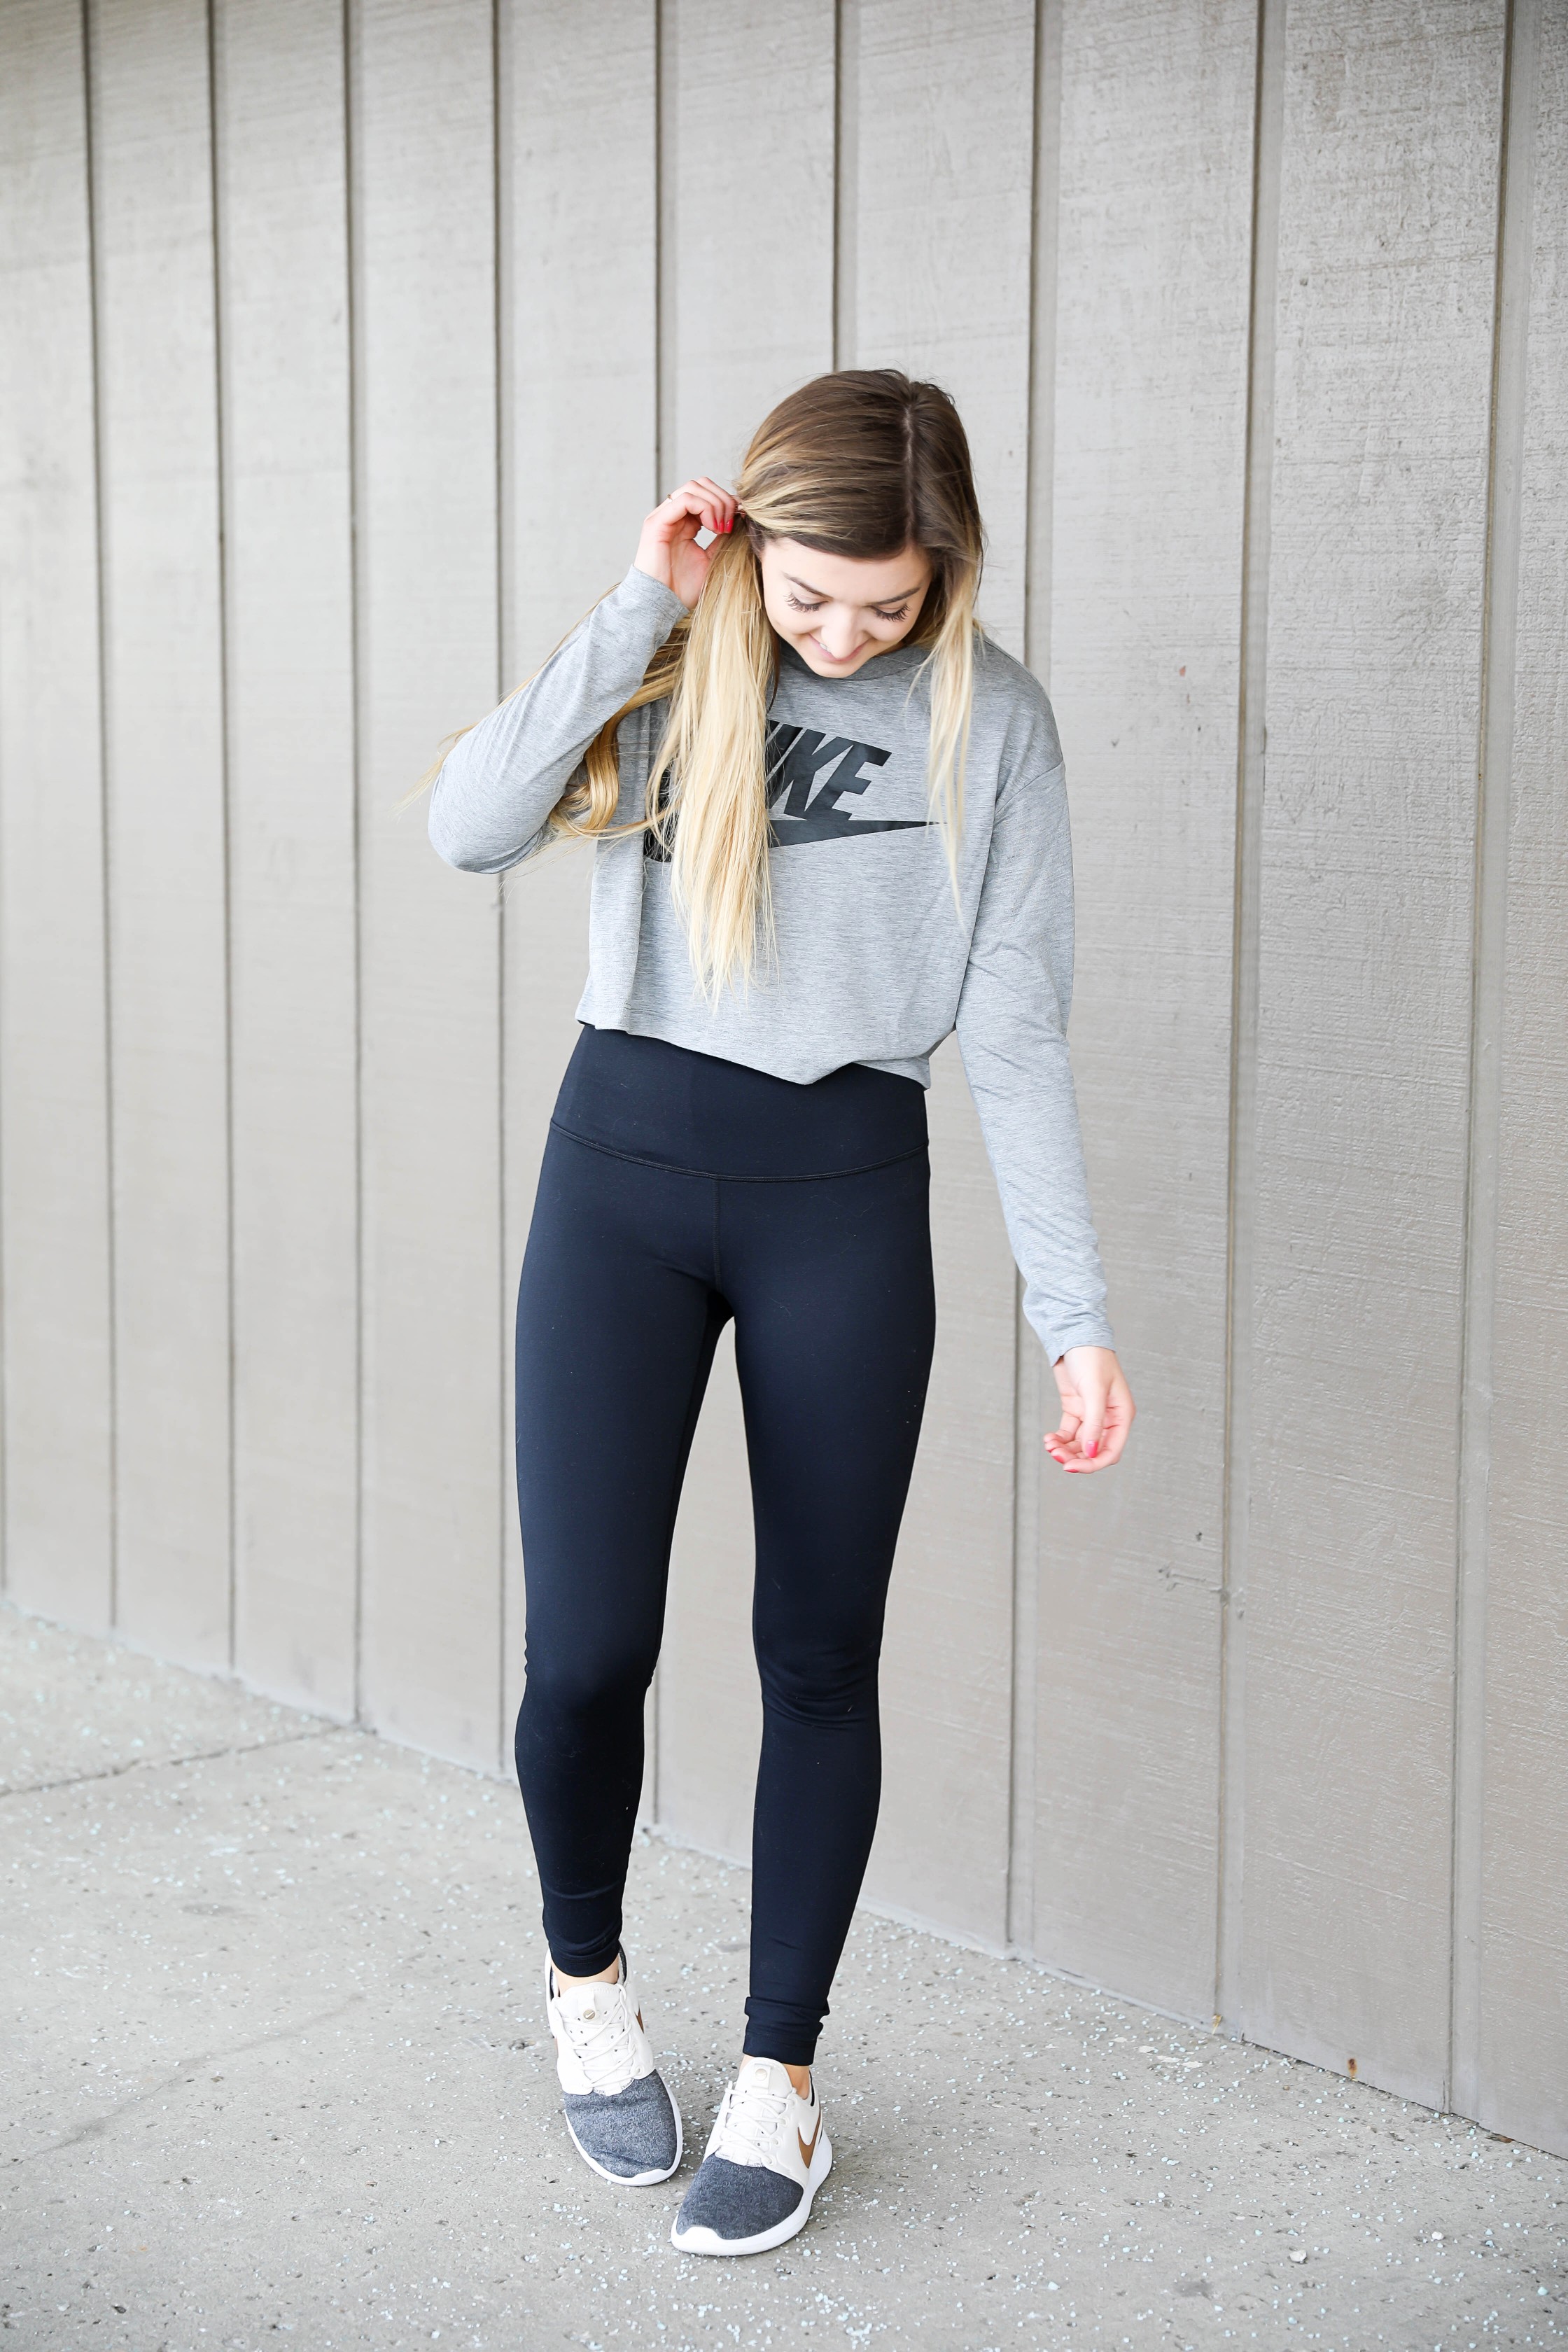 Effortless Athleisure Inspiration with NIKE, Birkenstock, and S'well